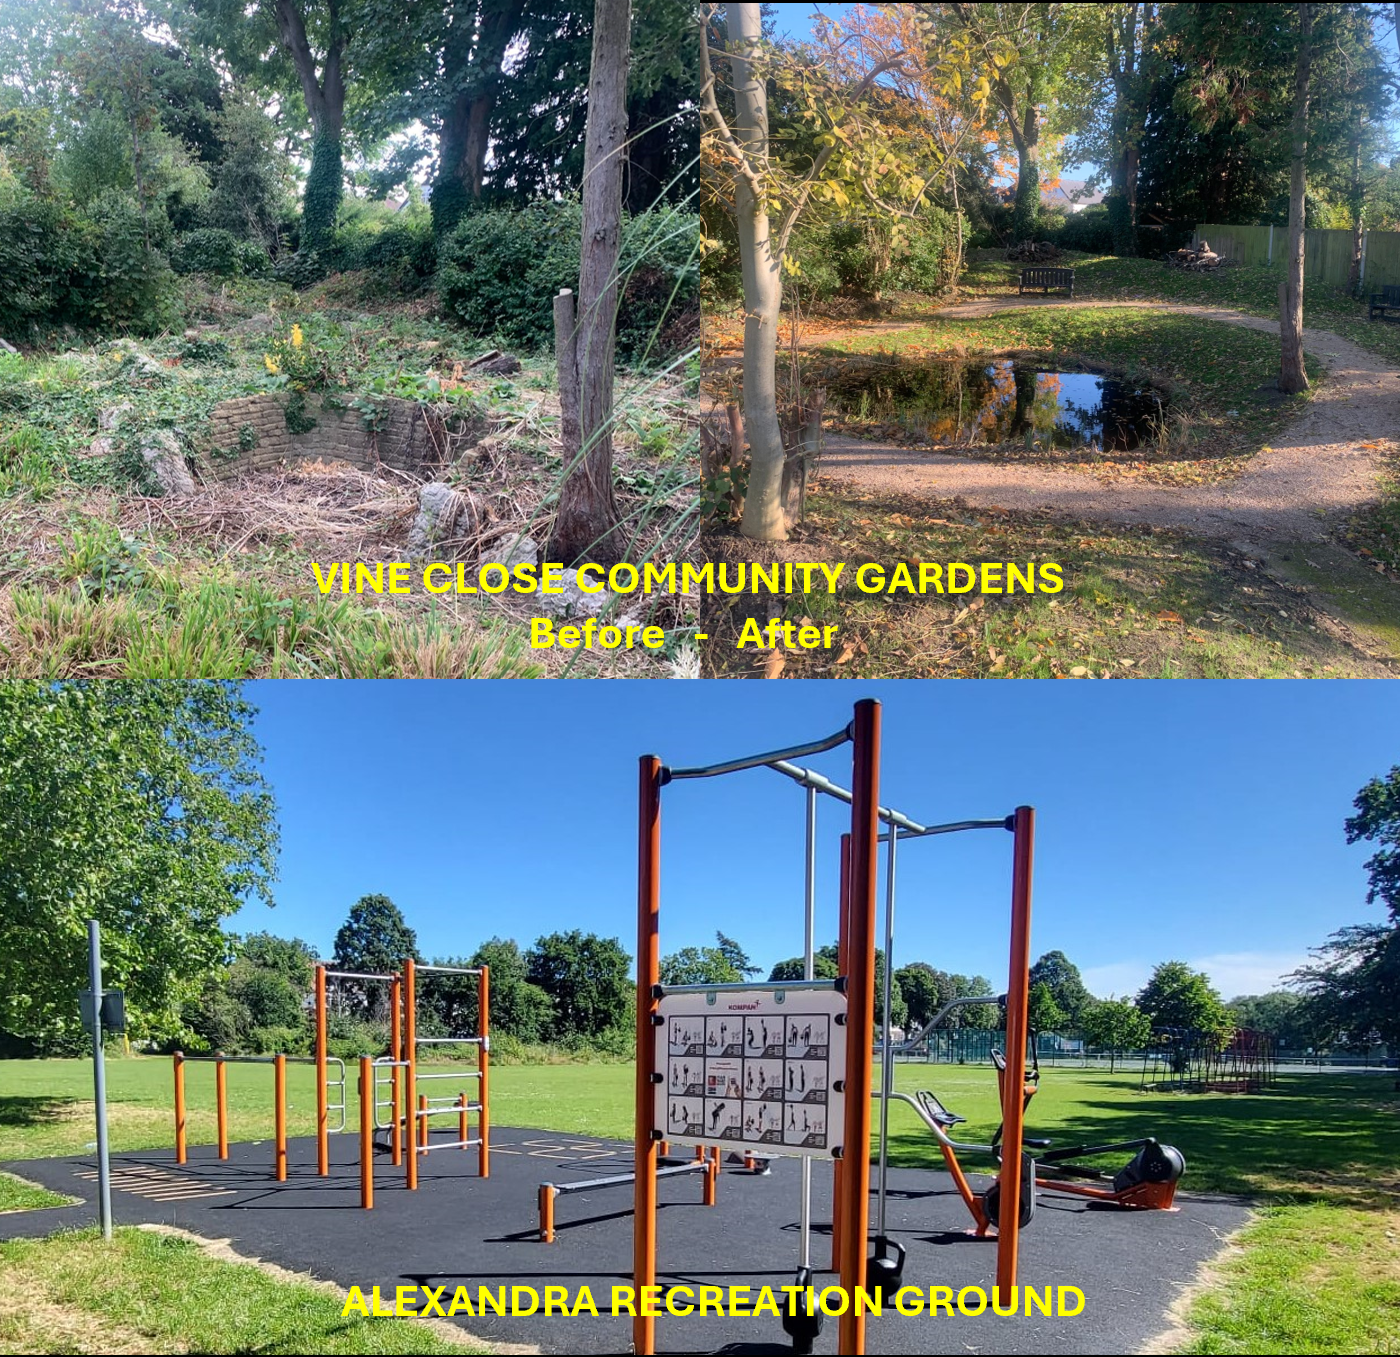 Composite of three photos. Top left Vine Close Community Gardens before and top right after restoring the gardens. Bottom is Alexandra Recreation Grounds after the installation of a play gym in the park.